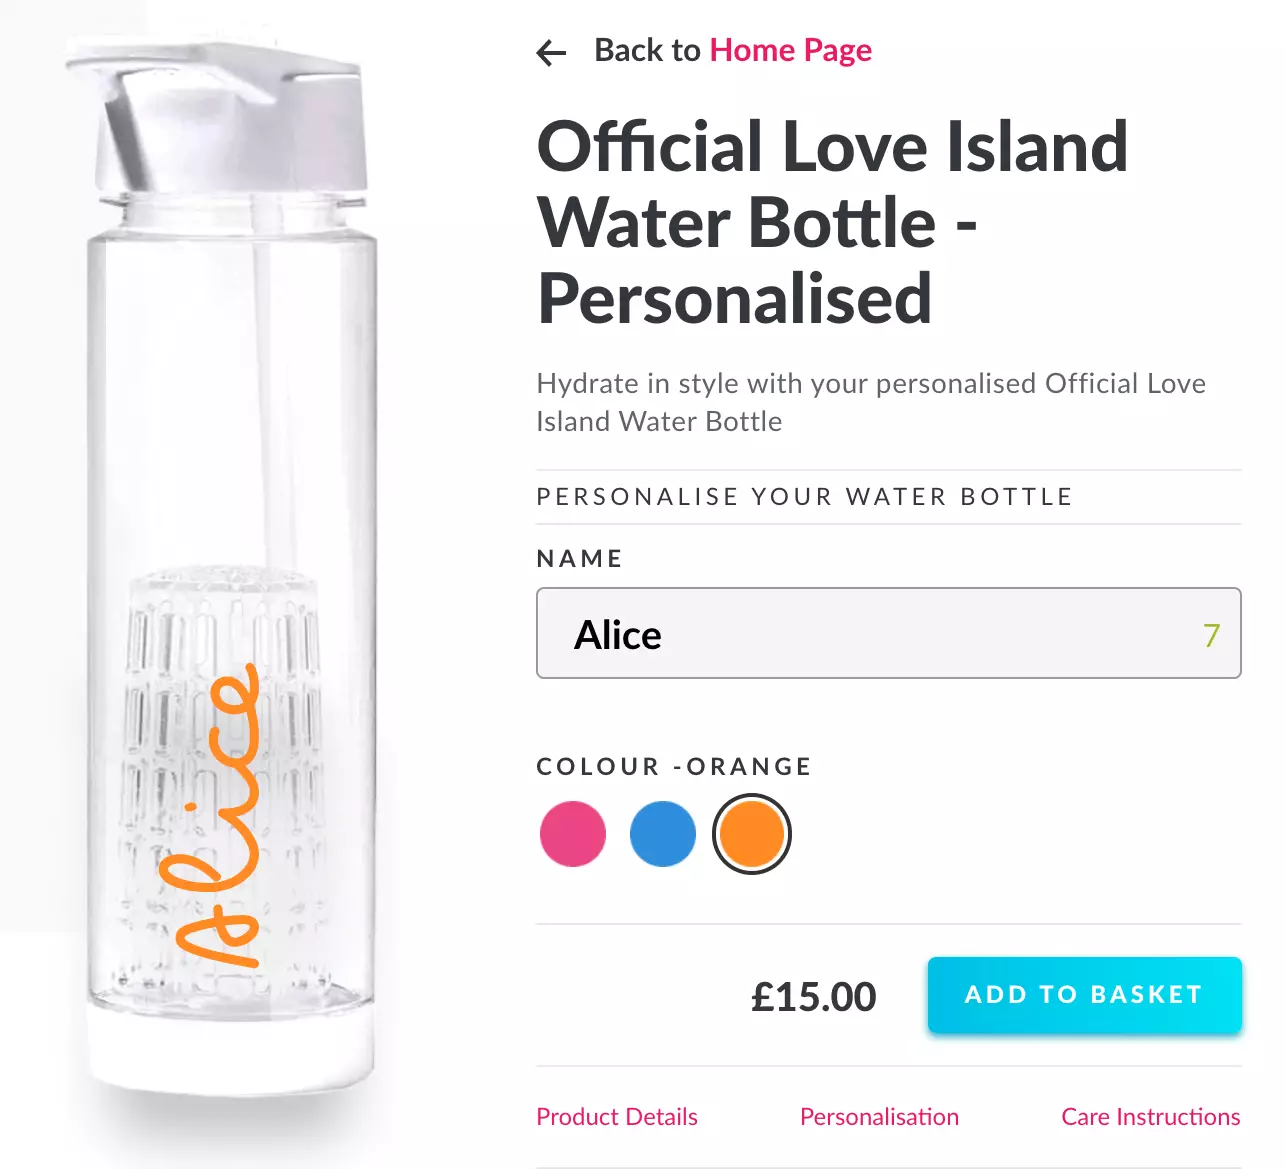 You can customise the water bottle by adding your name (